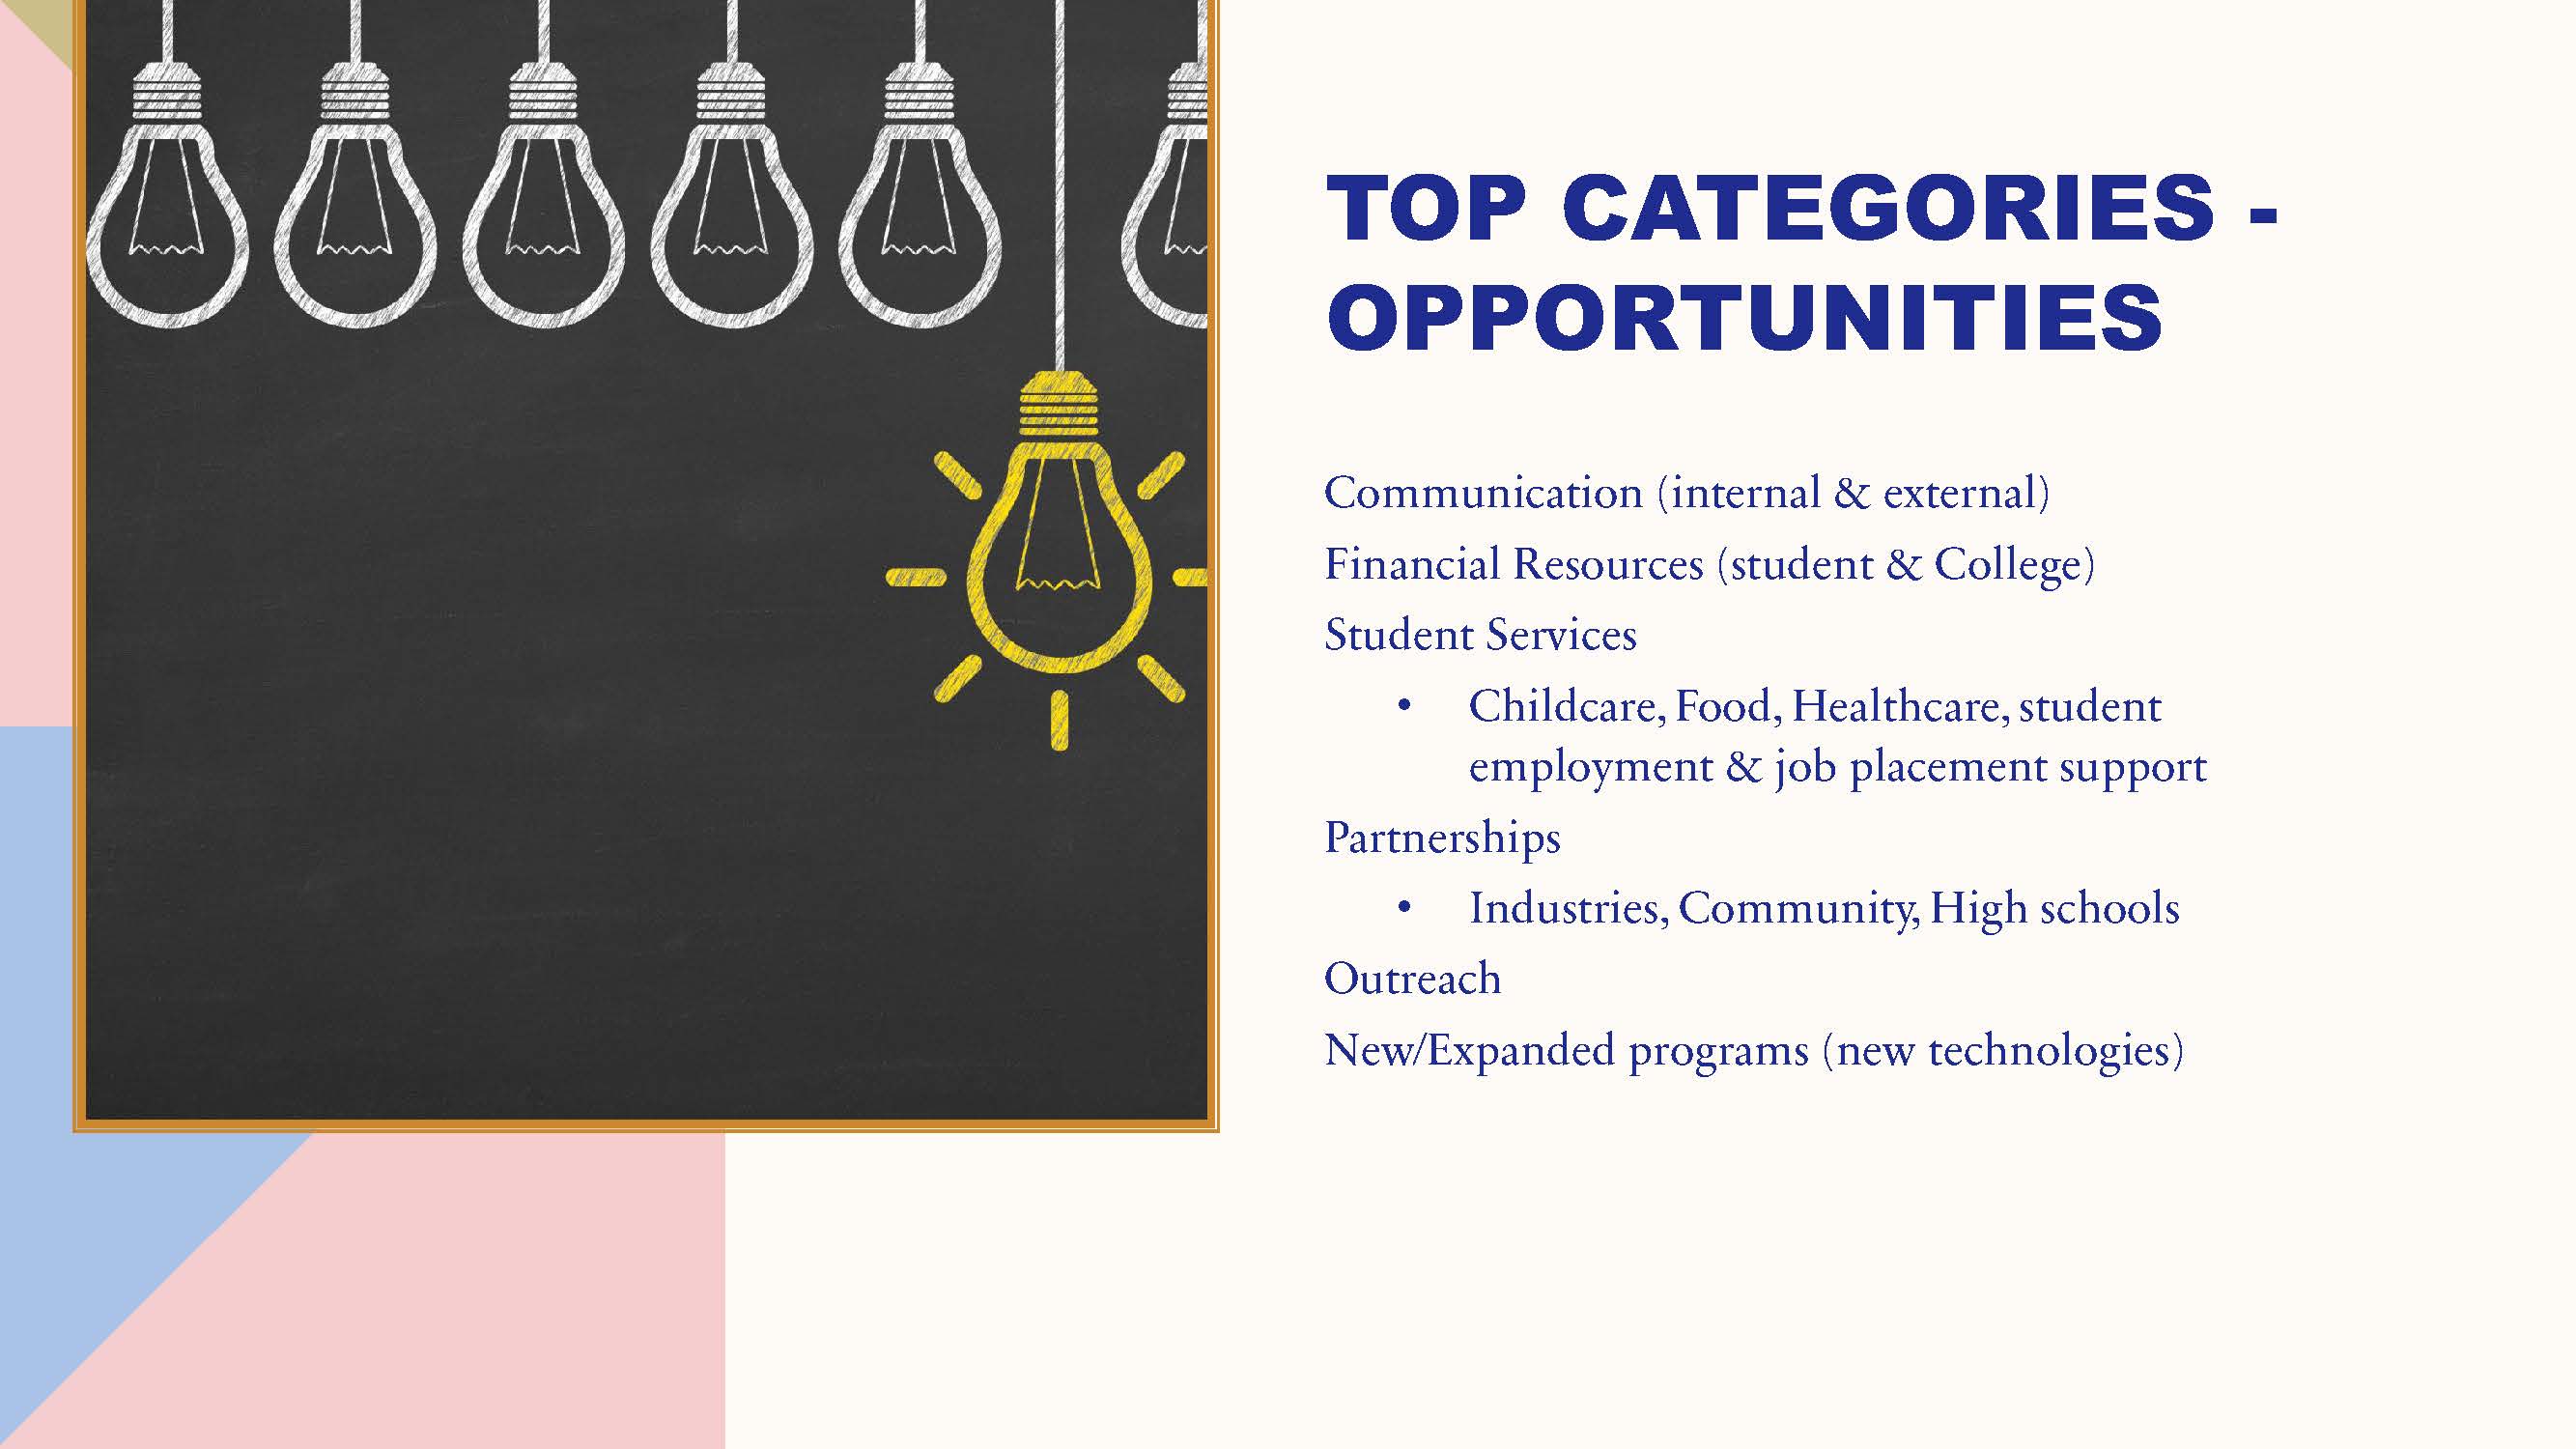 slide showing top opportunities, including: Communication (internal & external) Financial Resources (student & College) Student Services Childcare, Food, Healthcare, student employment & job placement support Partnerships Industries, Community, High schools  Outreach New/Expanded programs (new technologies)